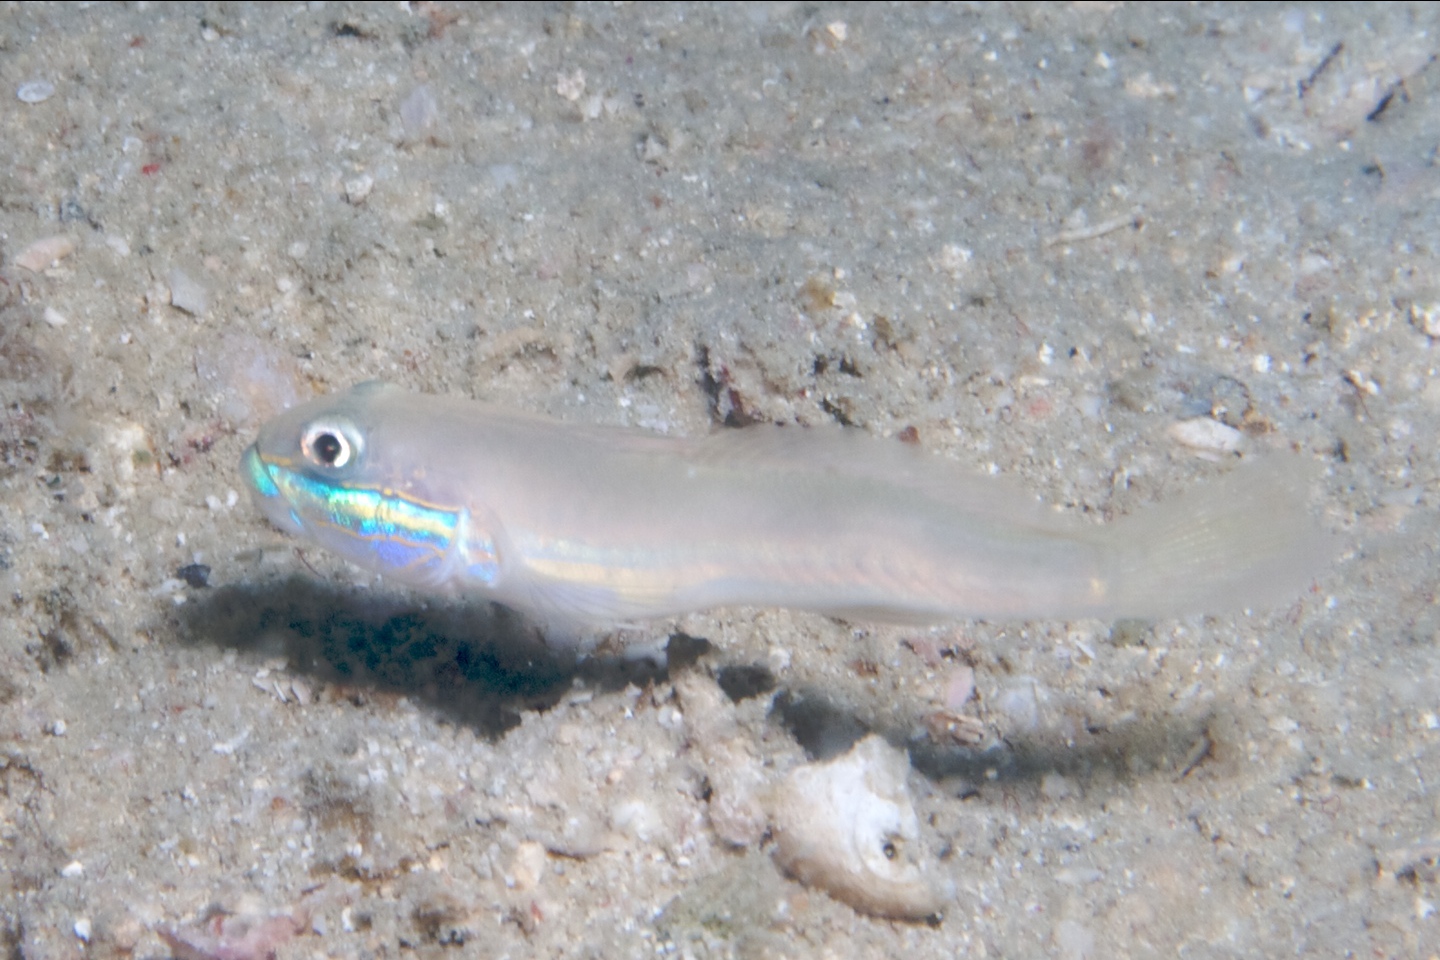 Greenband goby